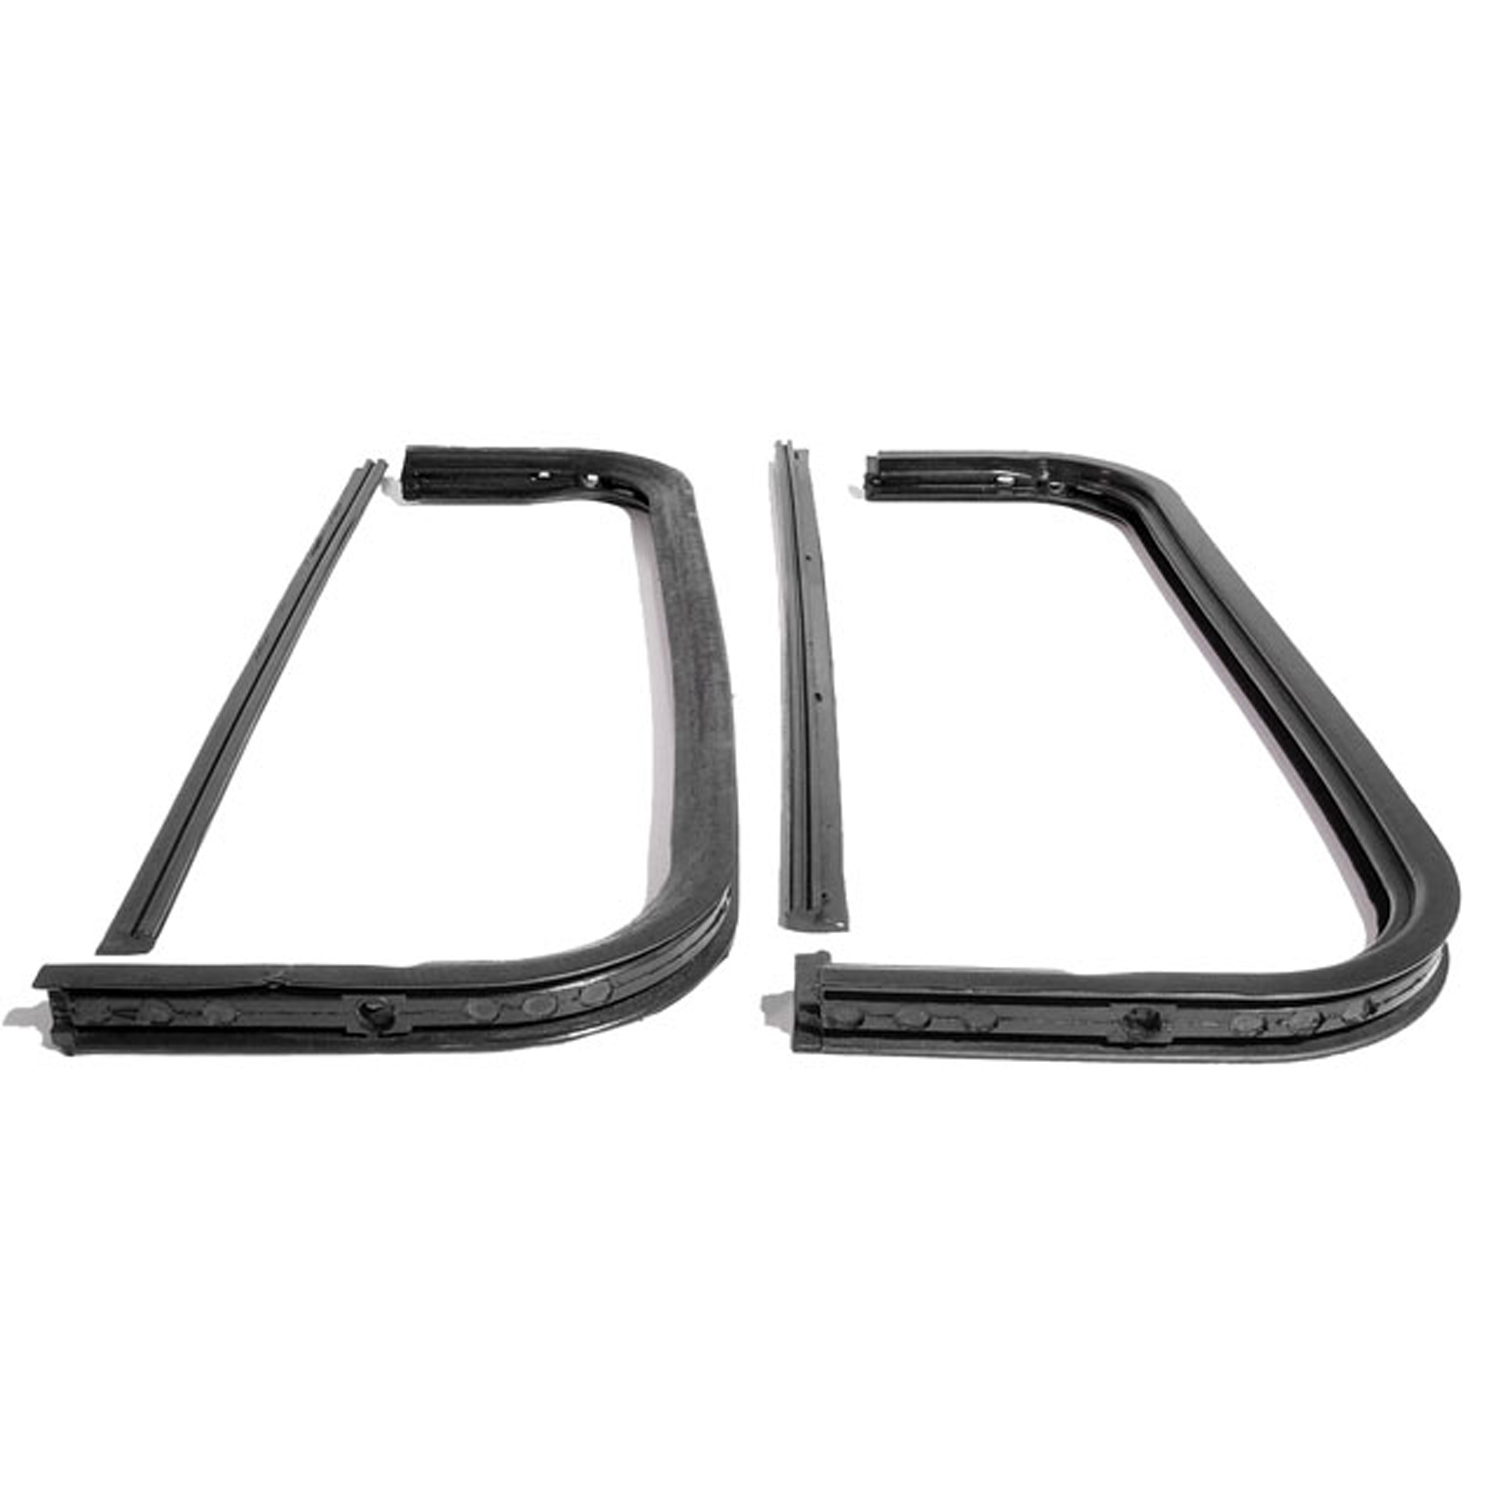 1963 Chevrolet C30 Pickup Vent Window Seals with Division Post Seals-WR 1900